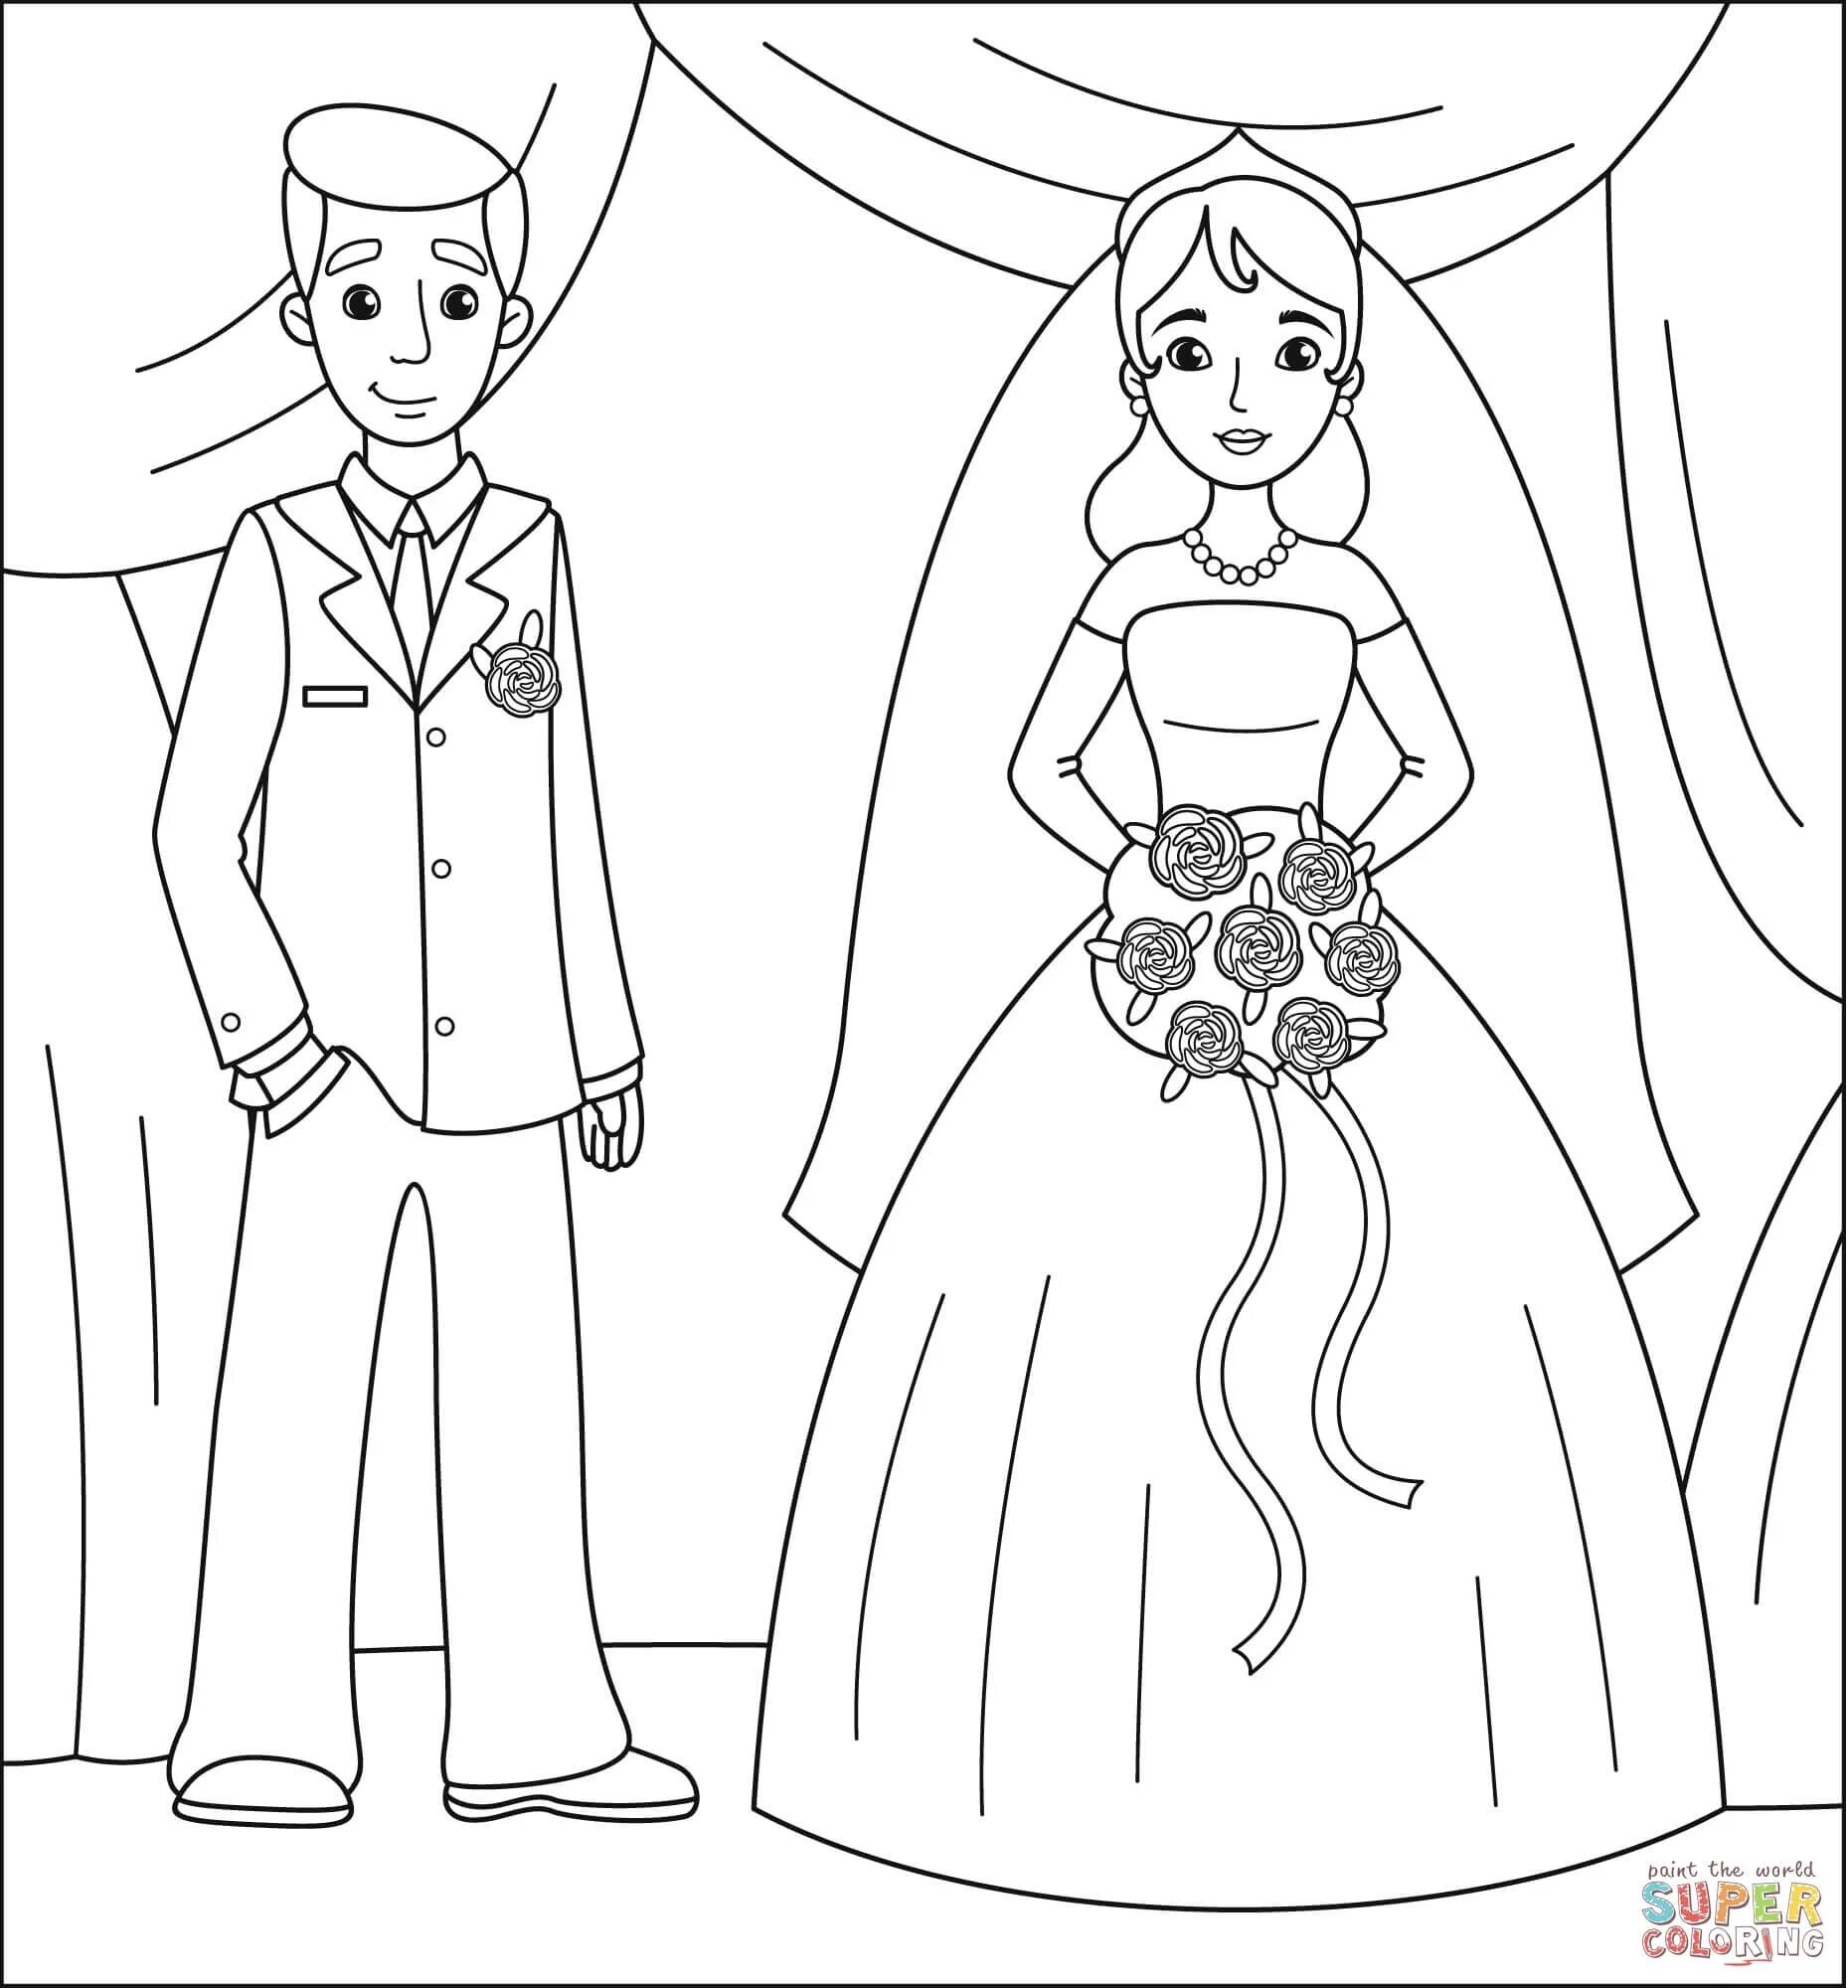 Bride and groom for kids #3